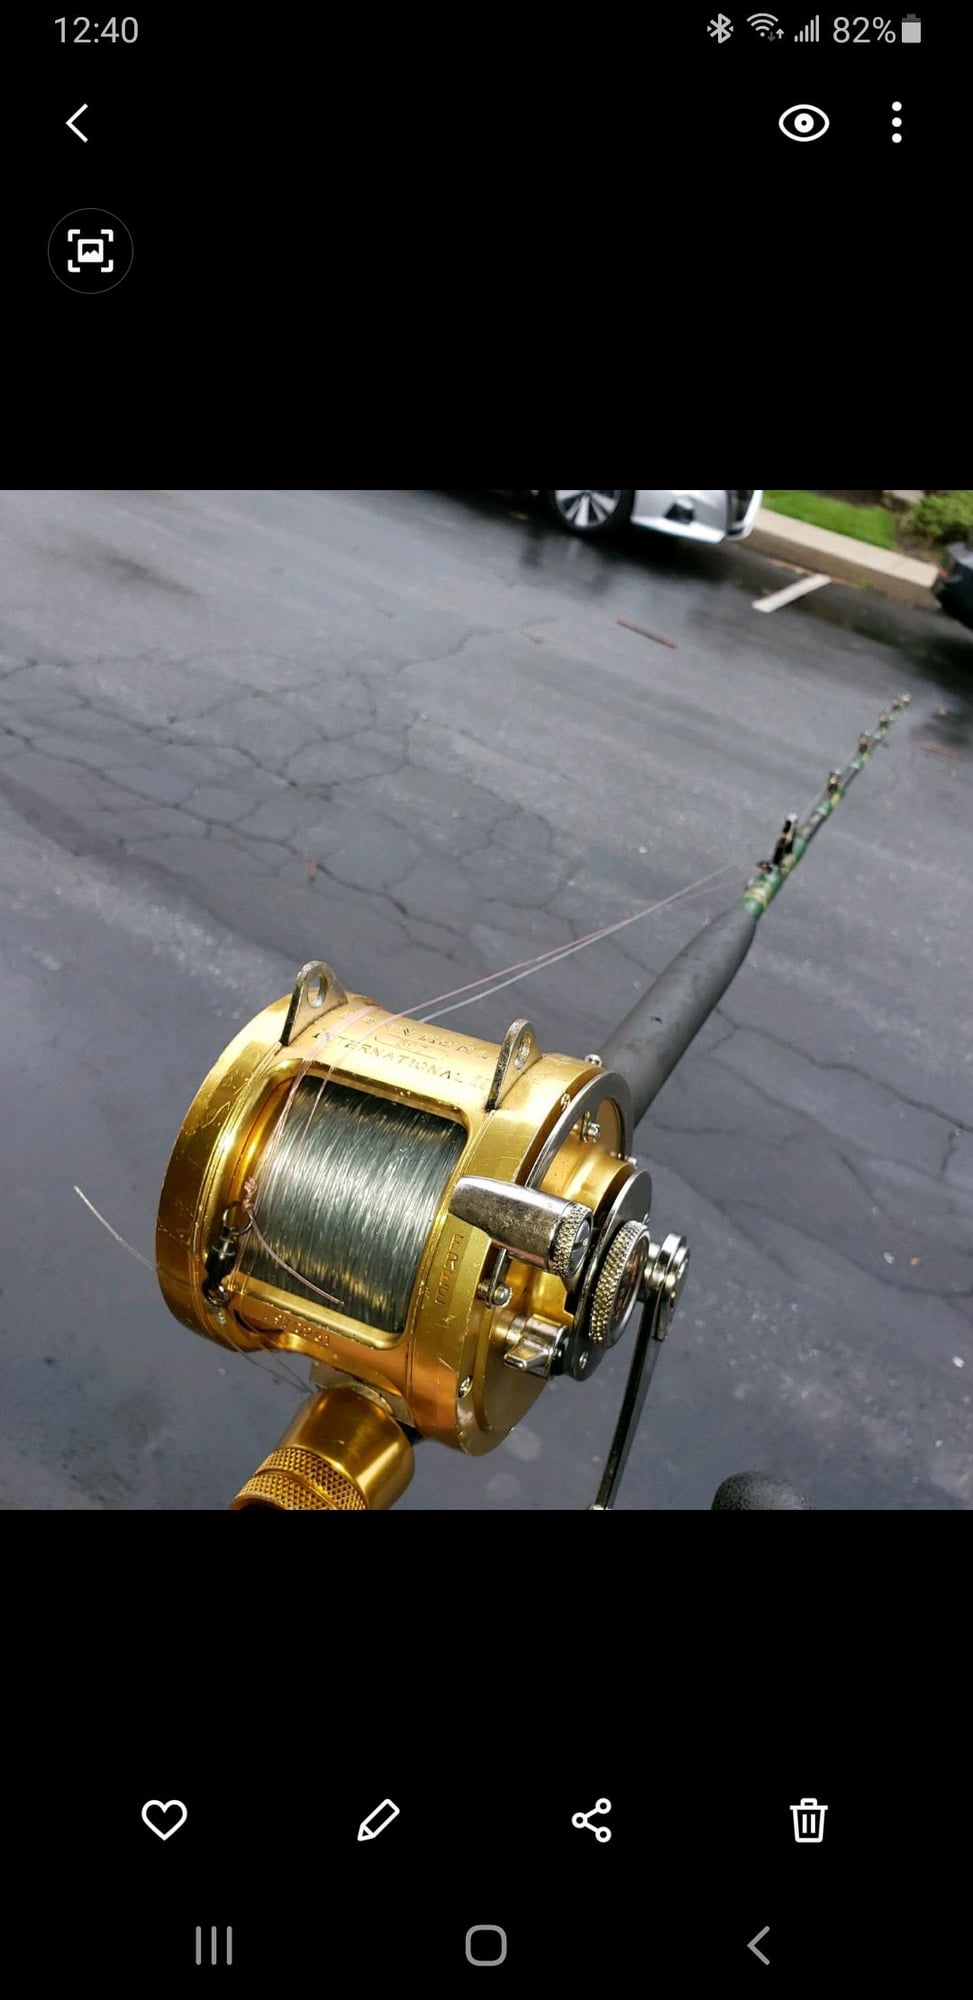 Pair of Avet HXW raptor 2 speed reels - The Hull Truth - Boating